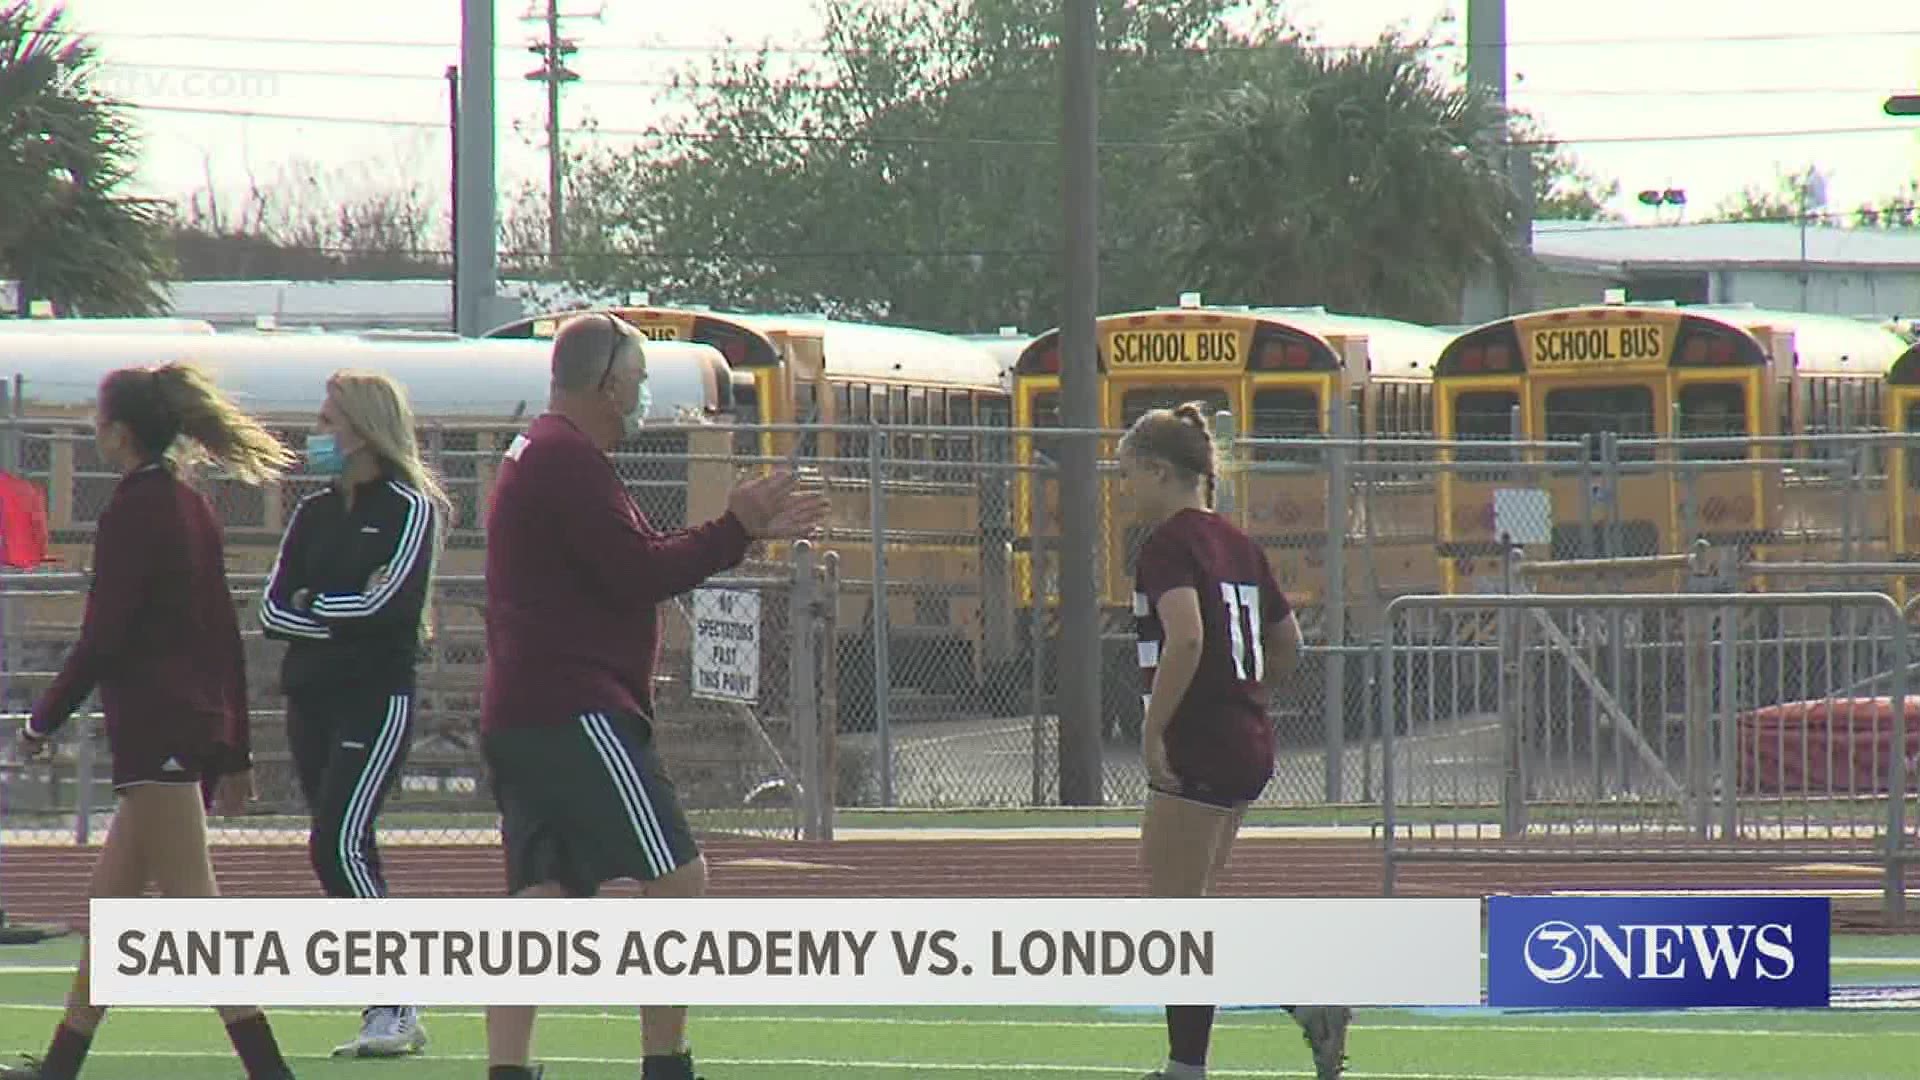 London got two early goals in a 3-0 win over the Lady Lions in the region quarterfinal Thursday at Cabaniss.